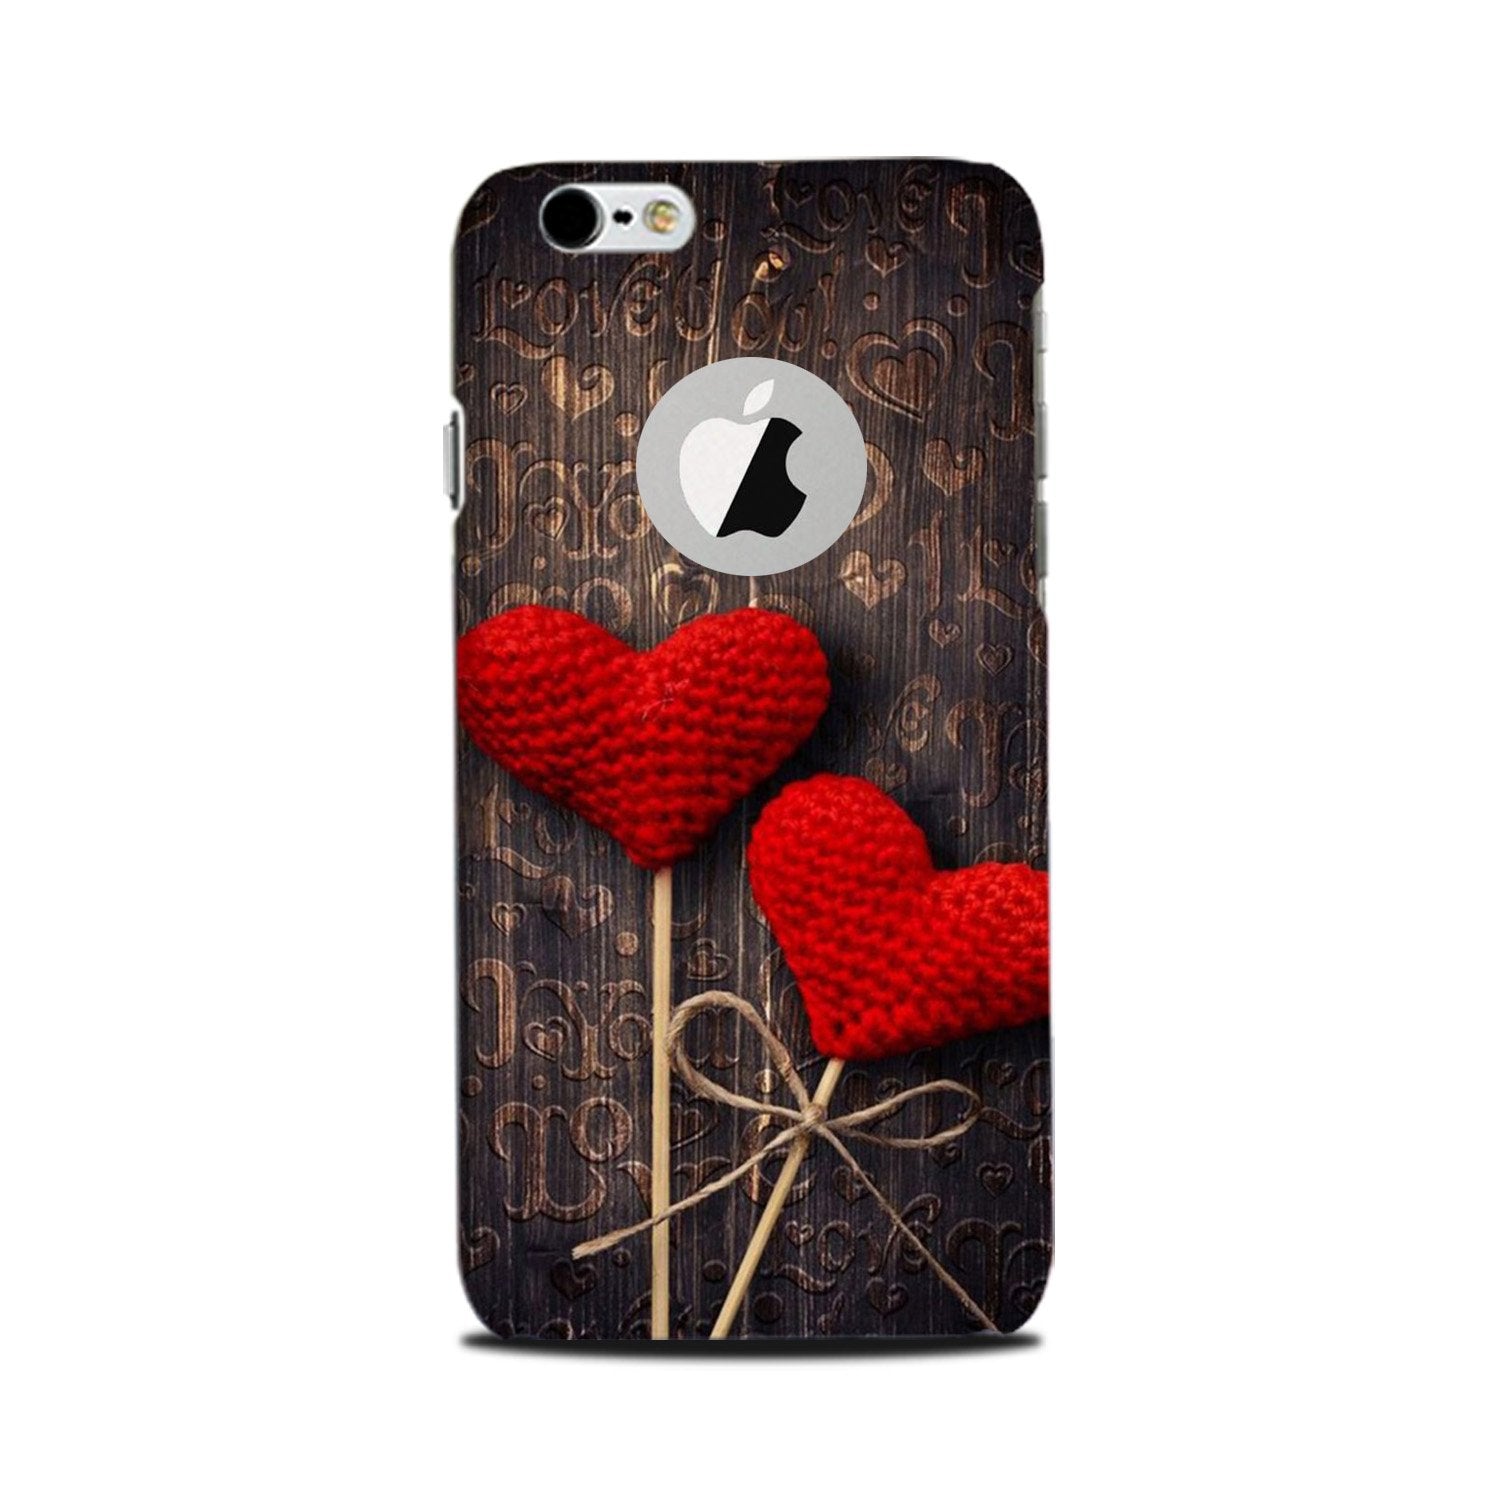 Red Hearts Case for iPhone 6 Plus / 6s Plus logo cut 